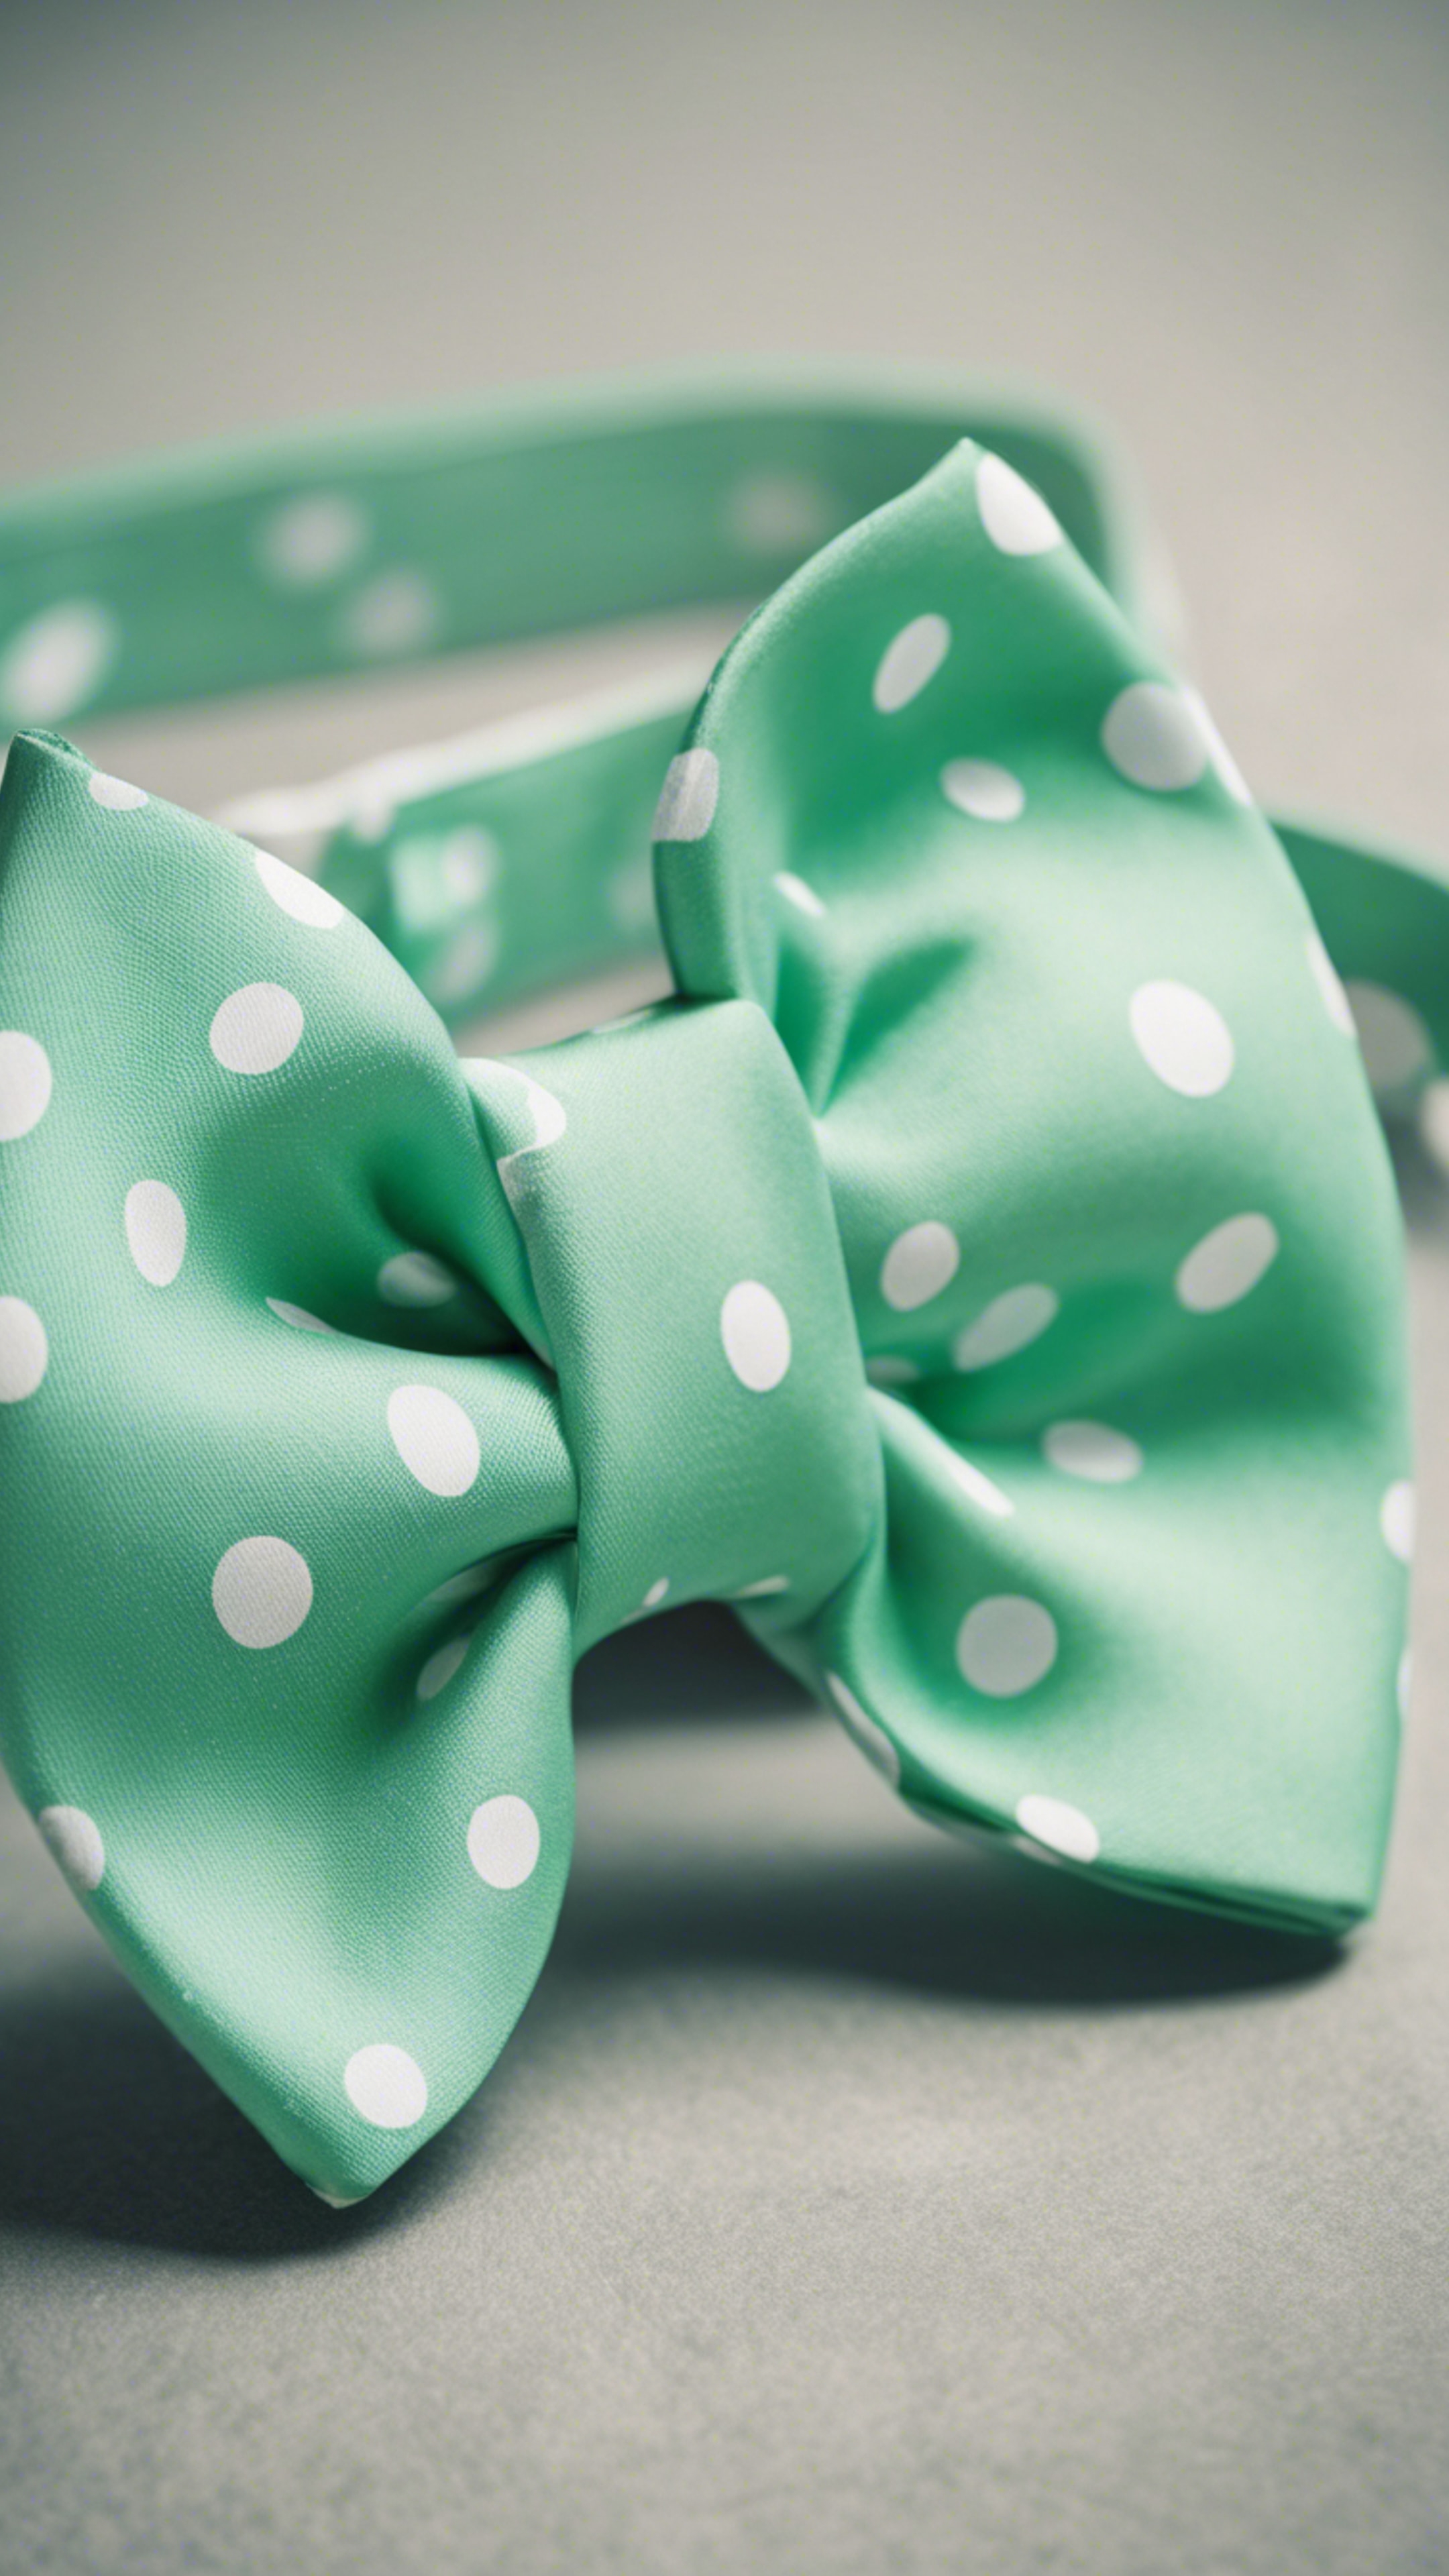 A detailed close-up of a mint green preppy bow tie with white dots. Wallpaper[42f277cb9da742c3b823]